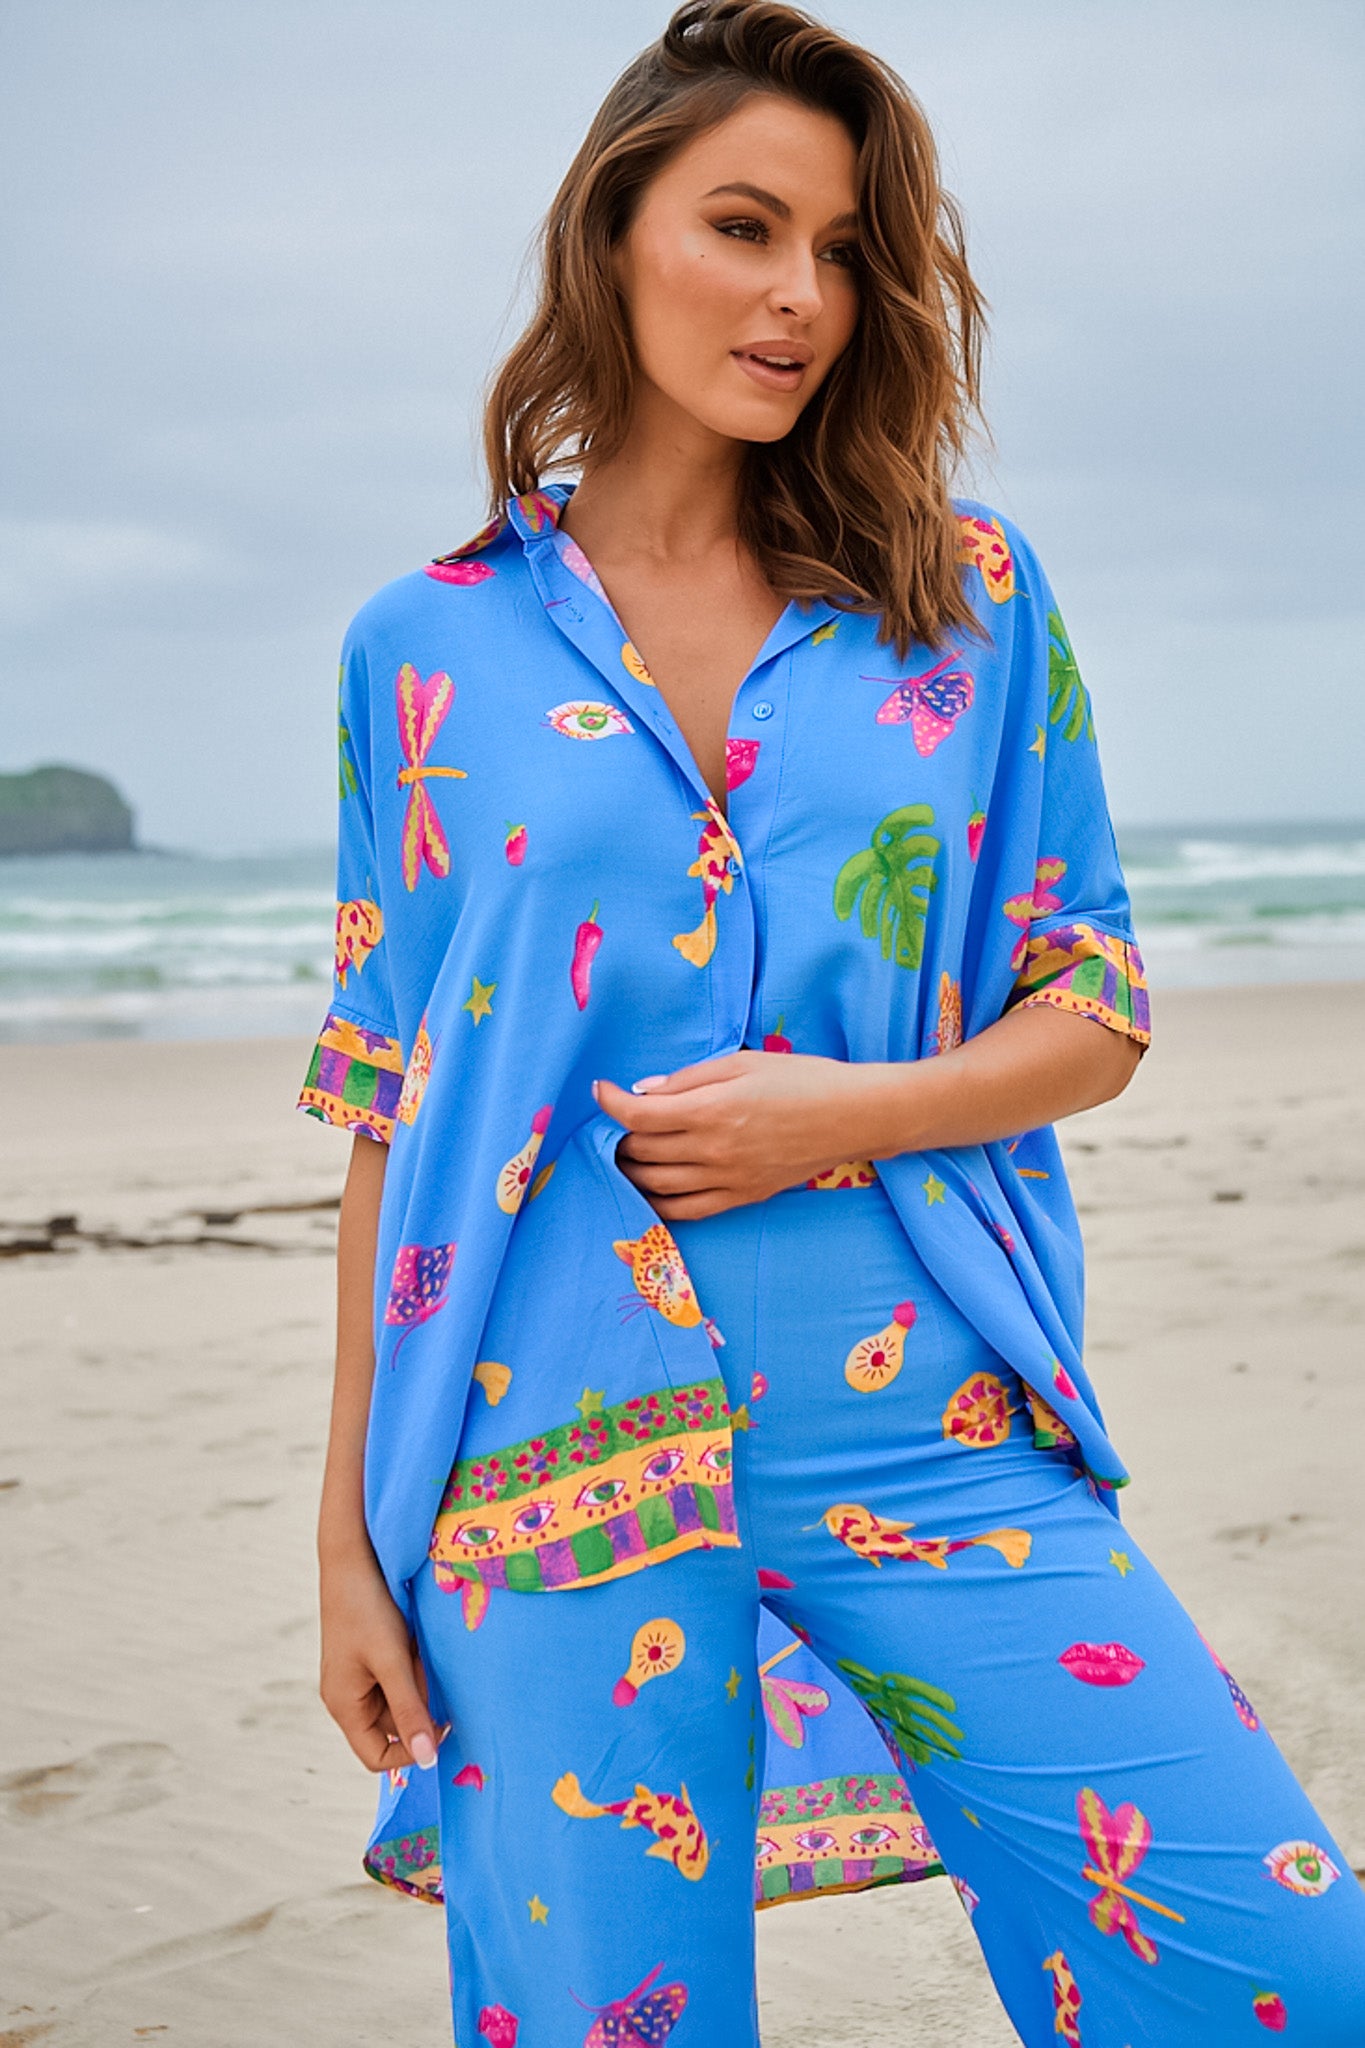 JAASE - River Shirt: Oversized Button Down Shirt with Scoop High-Low Hem in Mati Print